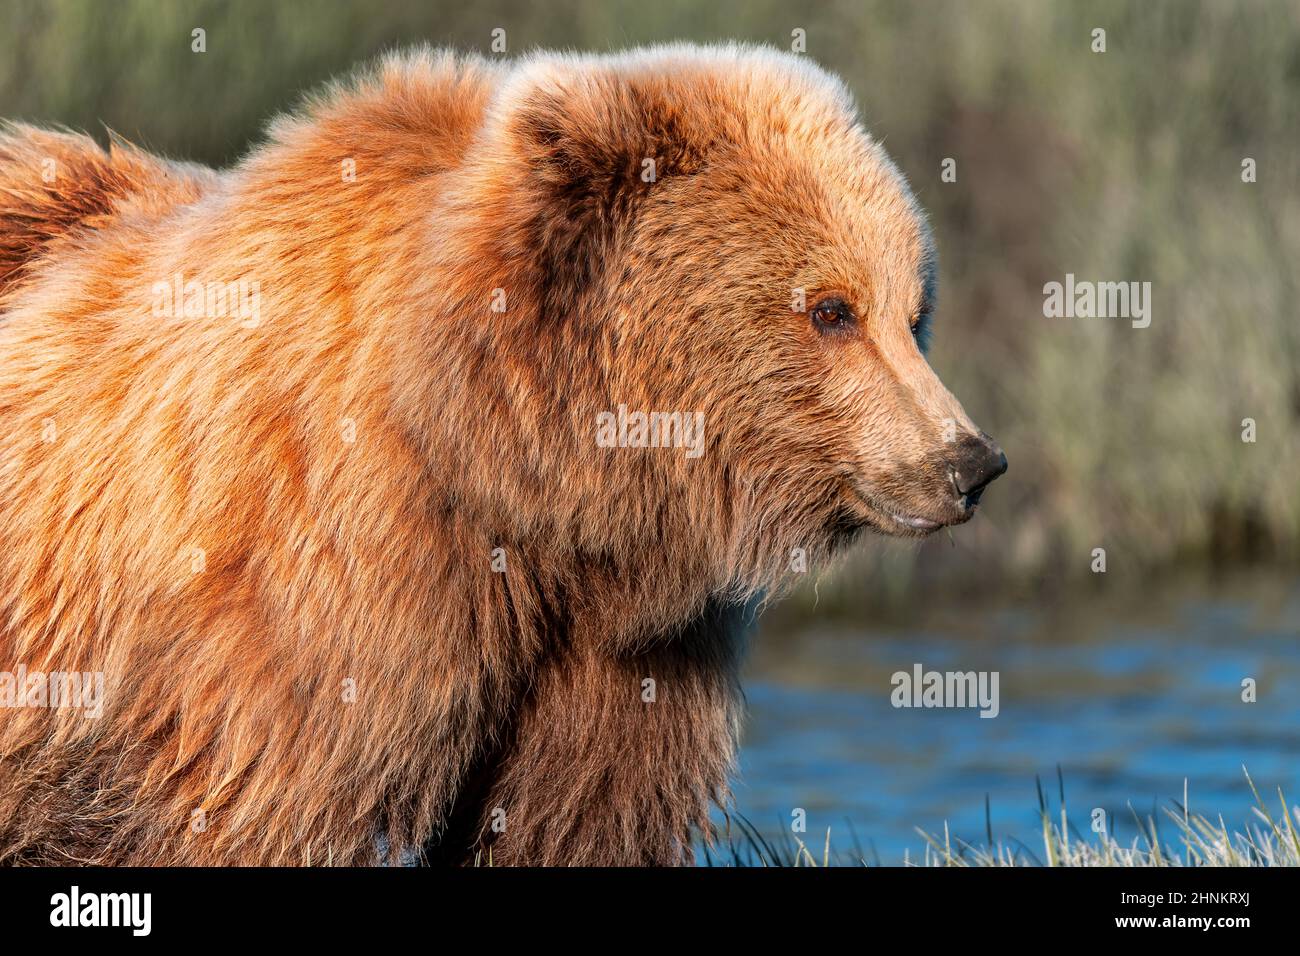 Brown bear or grizzly bear in nature in Alaska Stock Photo